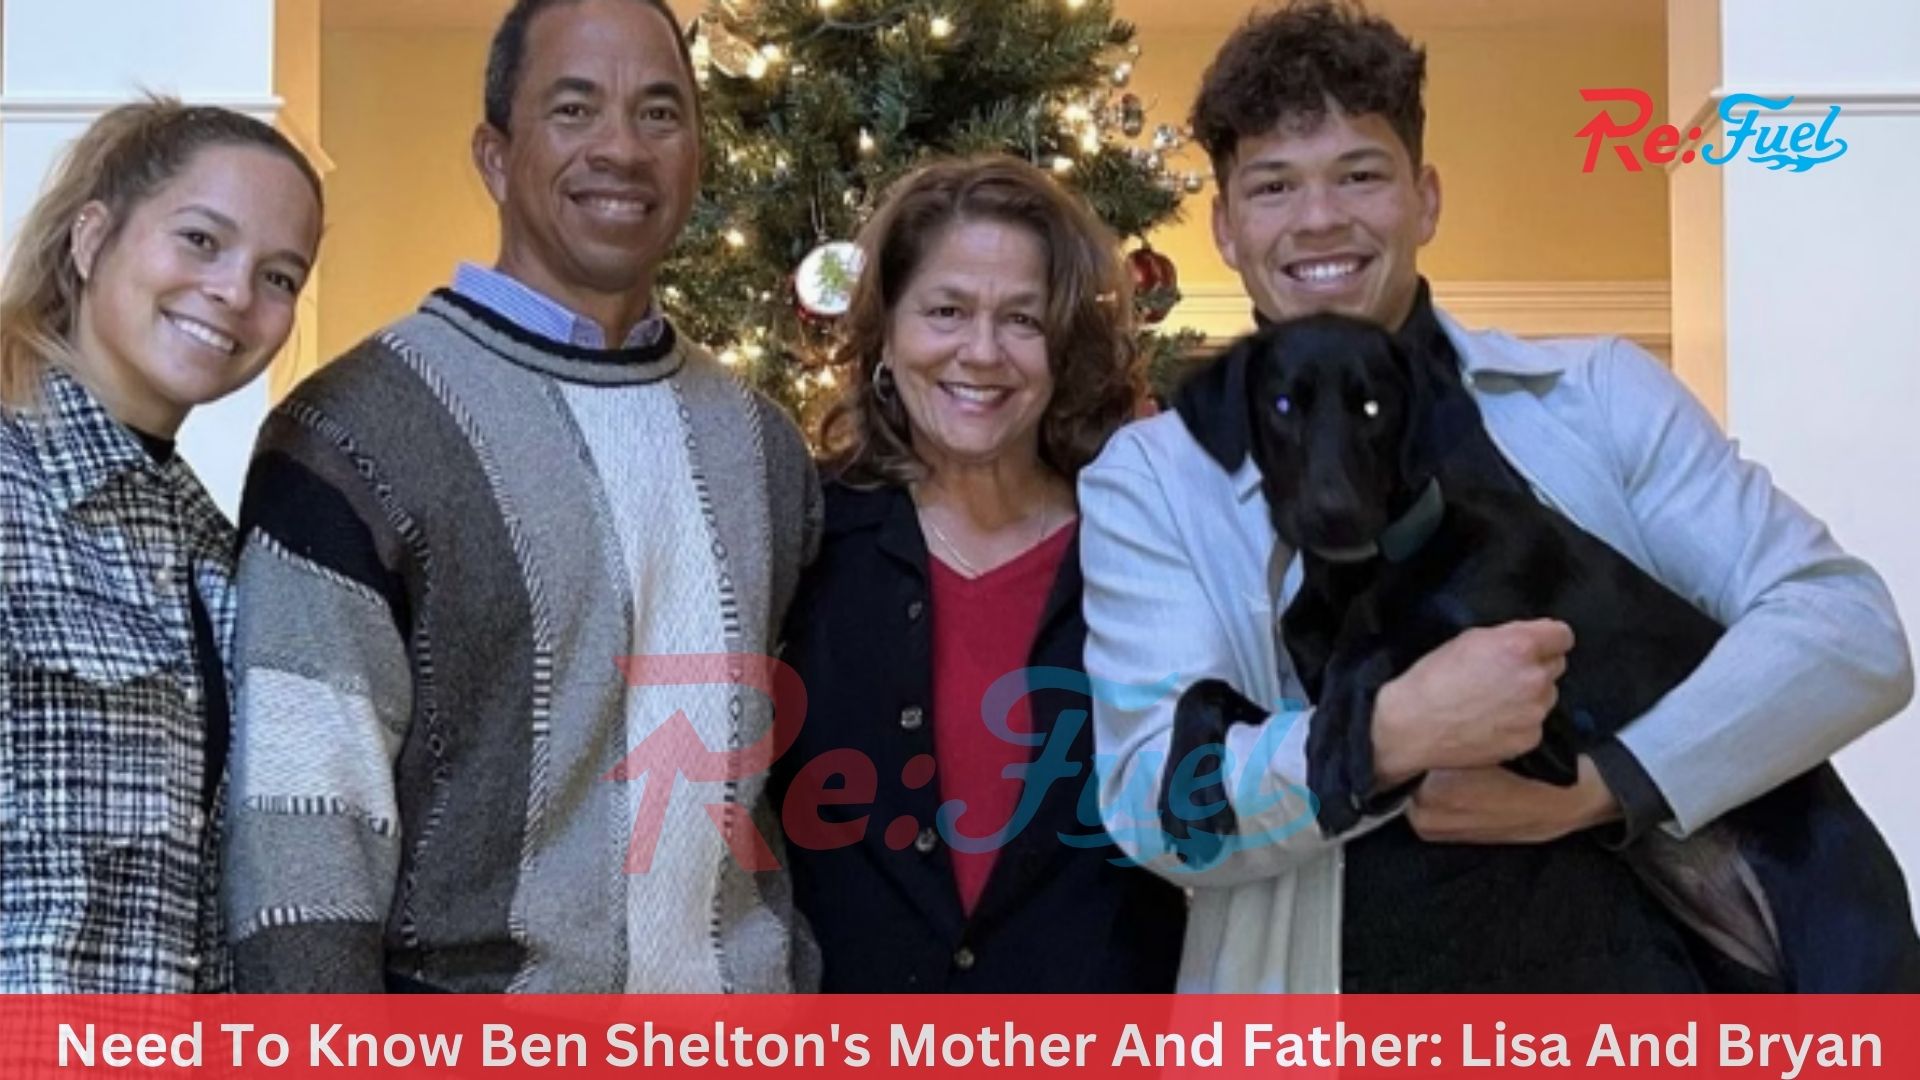 Need To Know Ben Shelton's Mother And Father: Lisa And Bryan